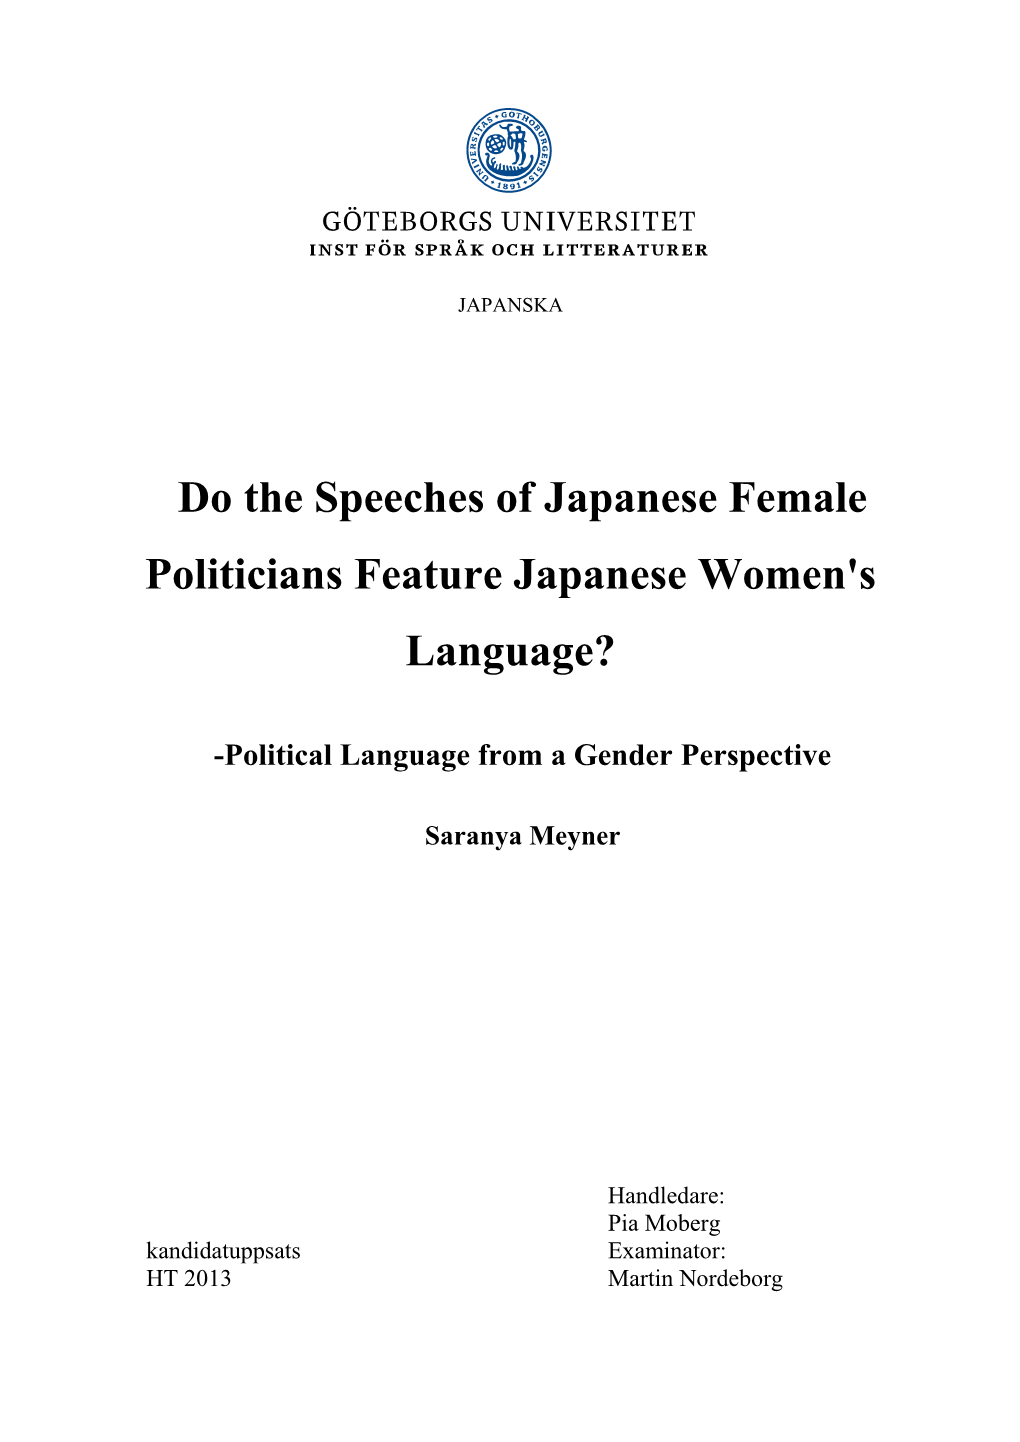 Do the Speeches of Japanese Female Politicians Feature Japanese Women's Language?